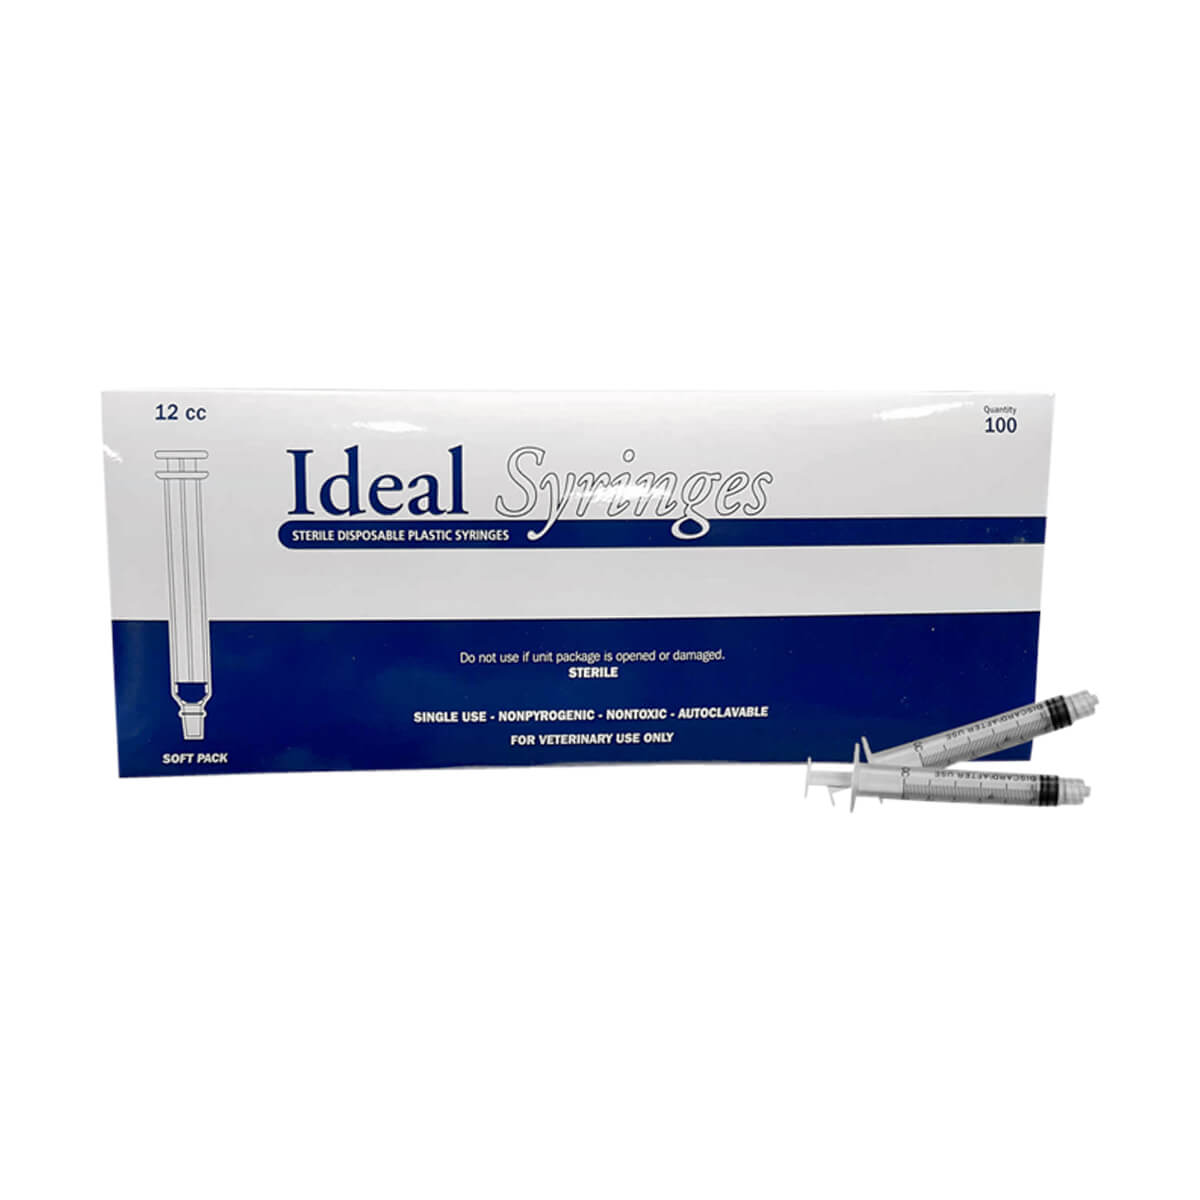 Disposable Syringes 100 pack - 12cc